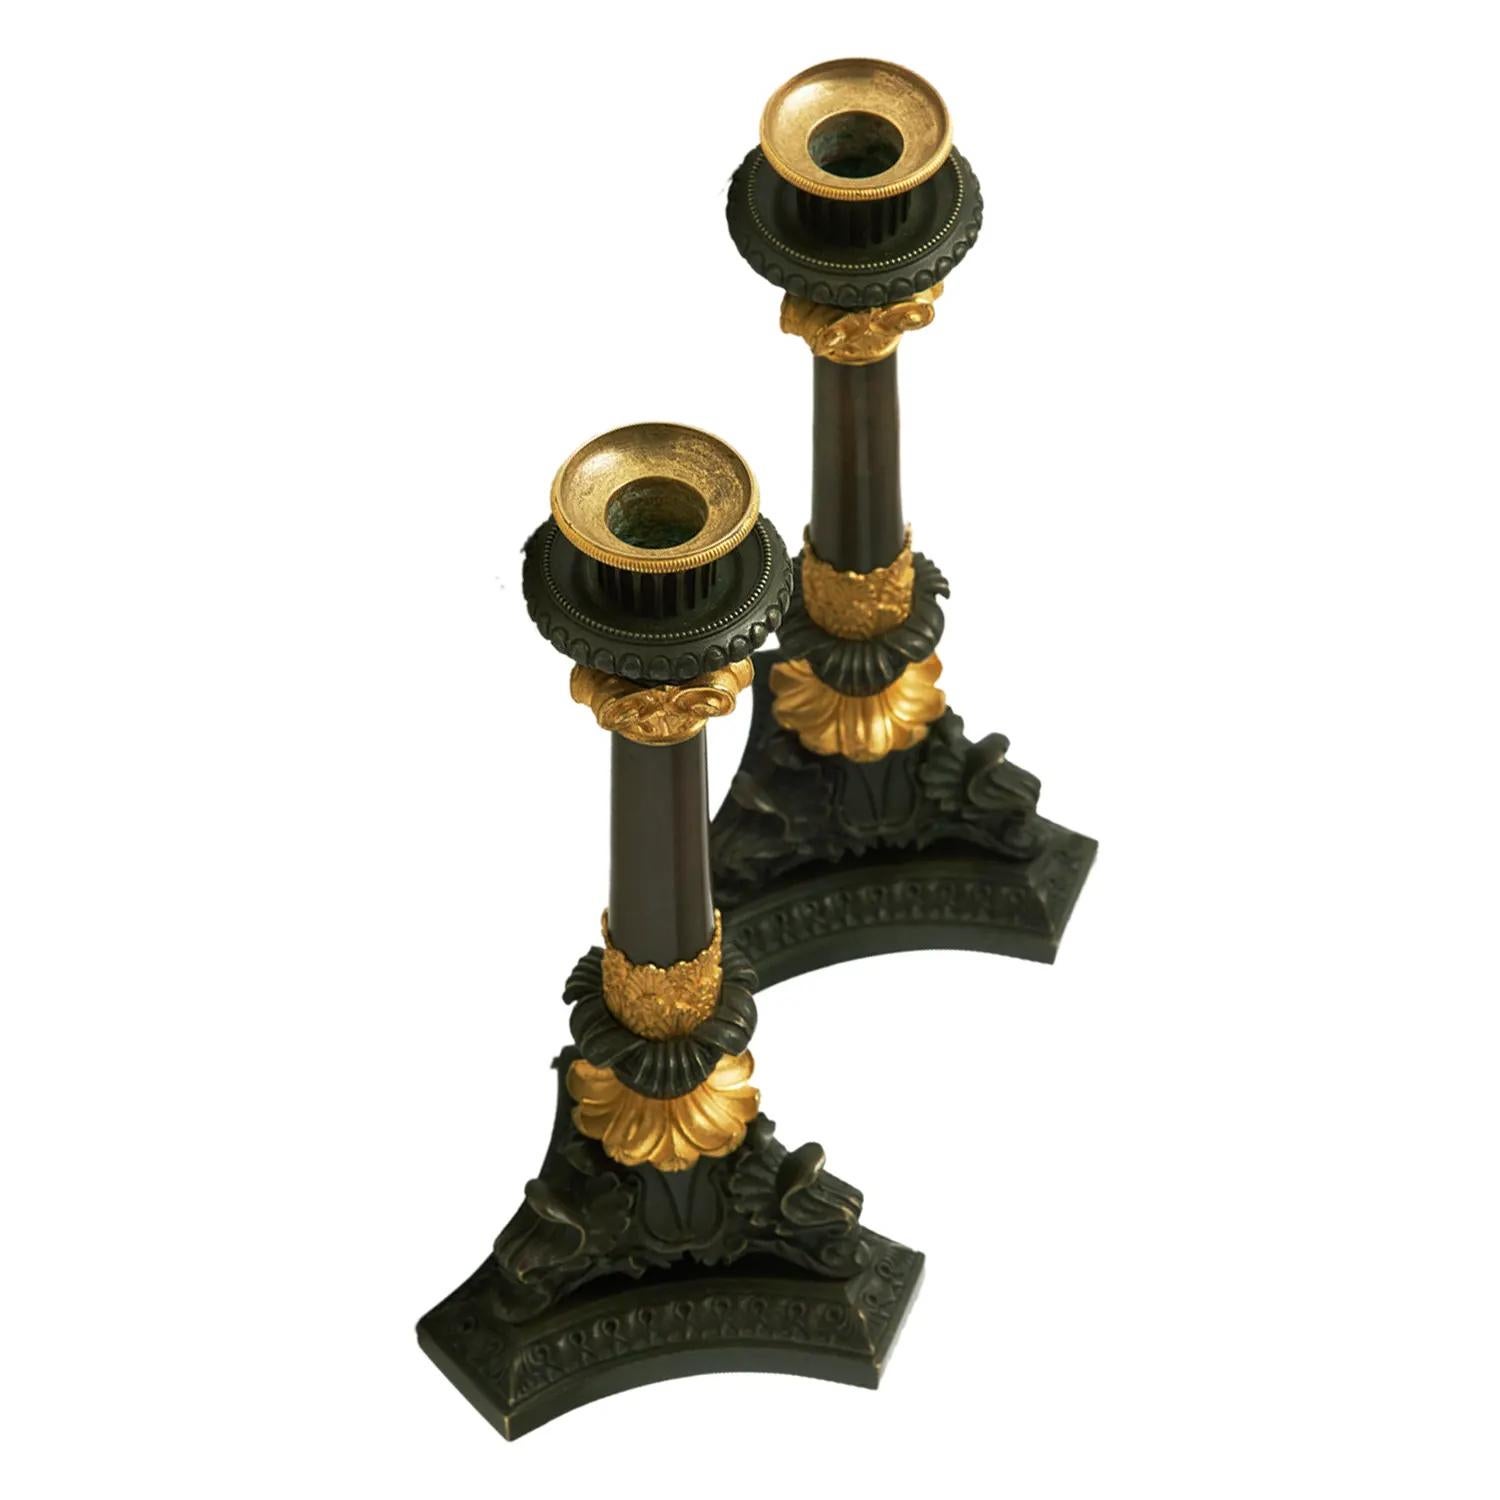 A gold-black, antique French pair of dark patinated candle sticks made of hand crafted gilded bronze, in good condition. The detailed candle holders are particularized with flowers decoration, resting on a tripod foot. The Parisian décor pieces